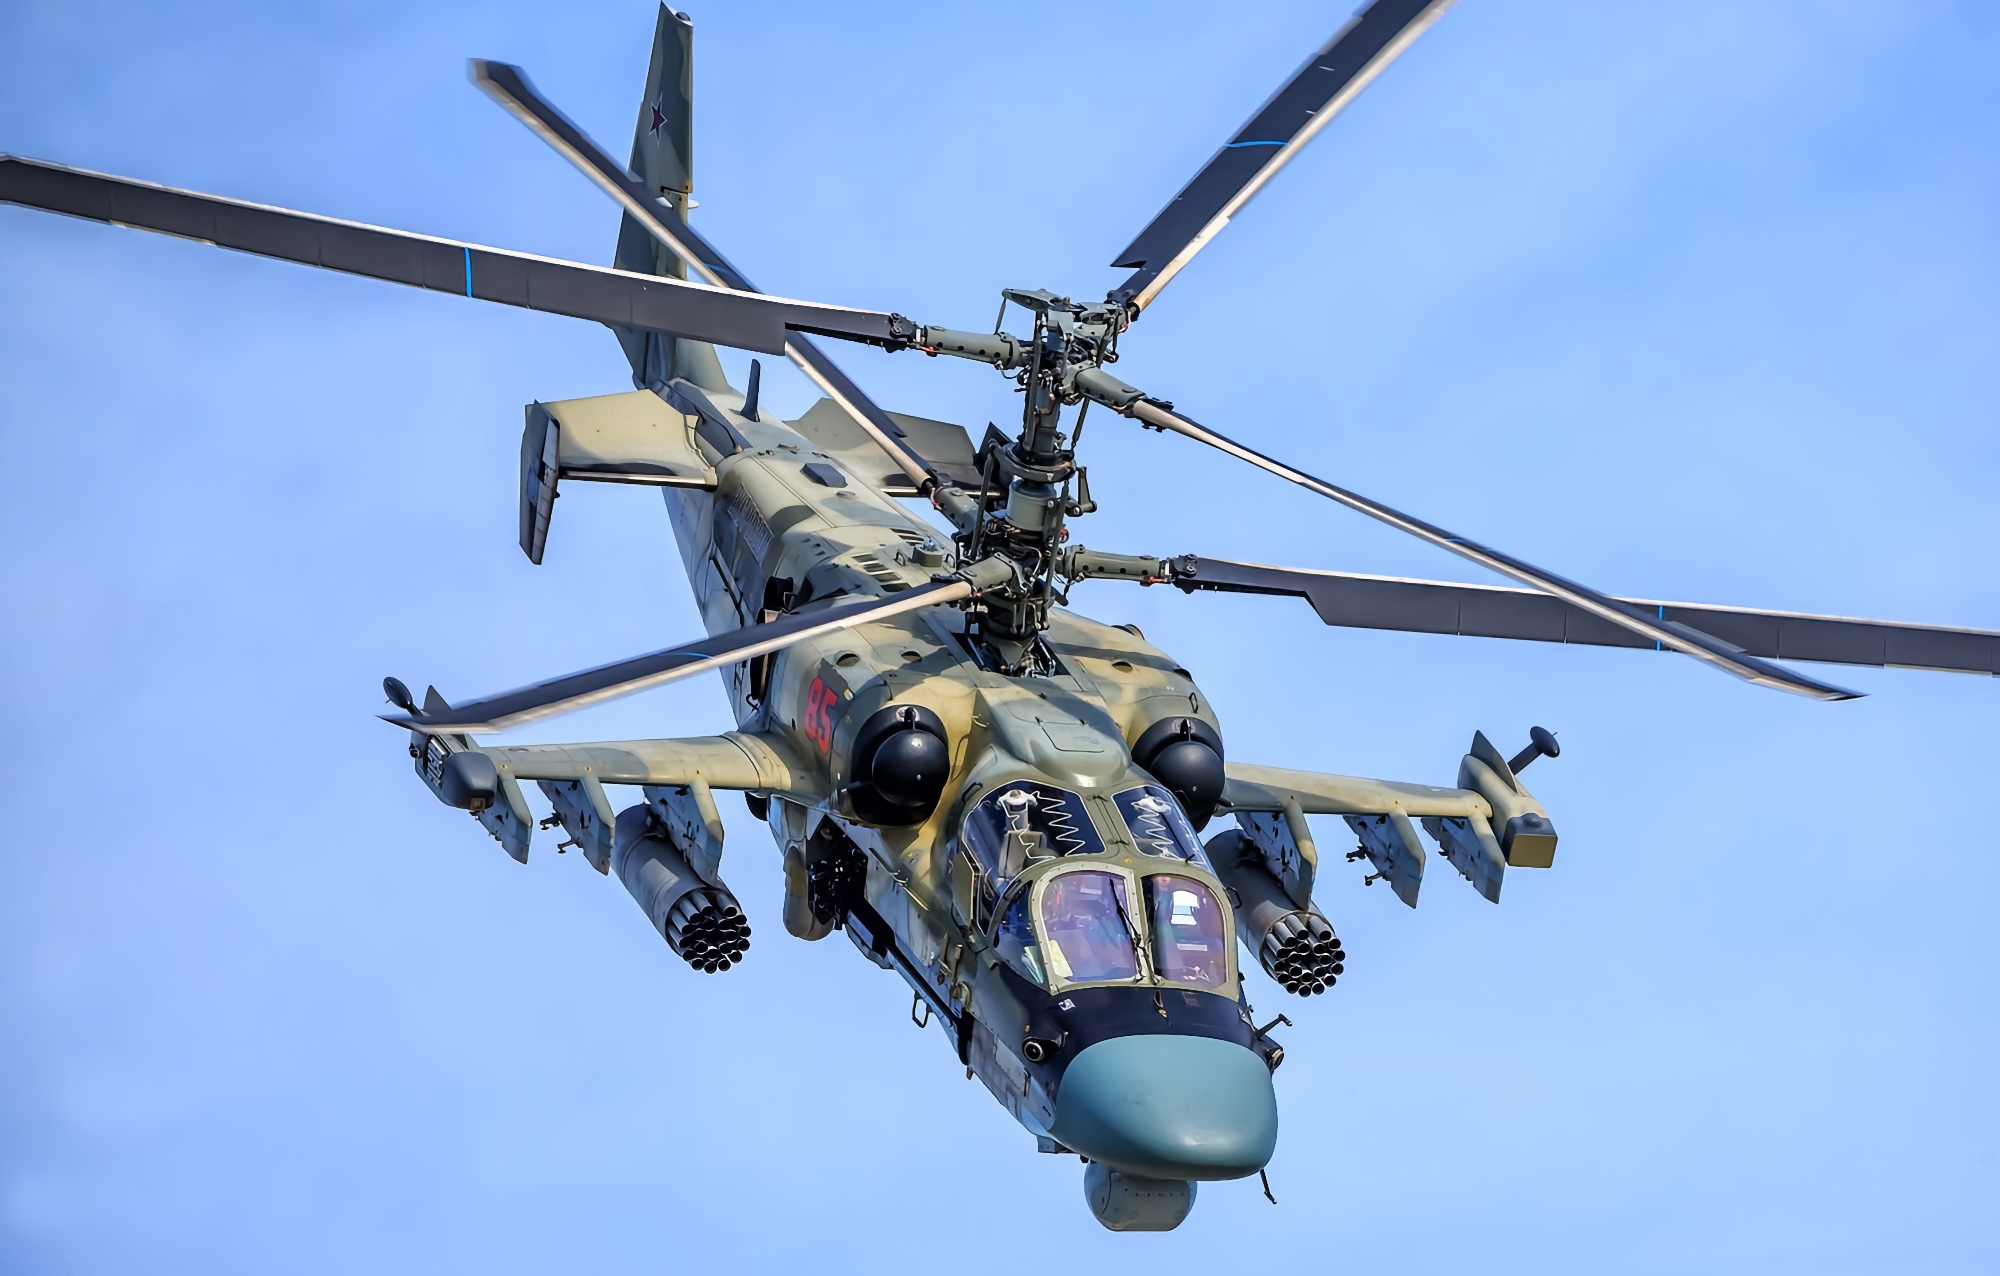 The AFU destroyed a $16,000,000 Russian Ka-52 Alligator helicopter and three Orlan-10 drones in 24 hours